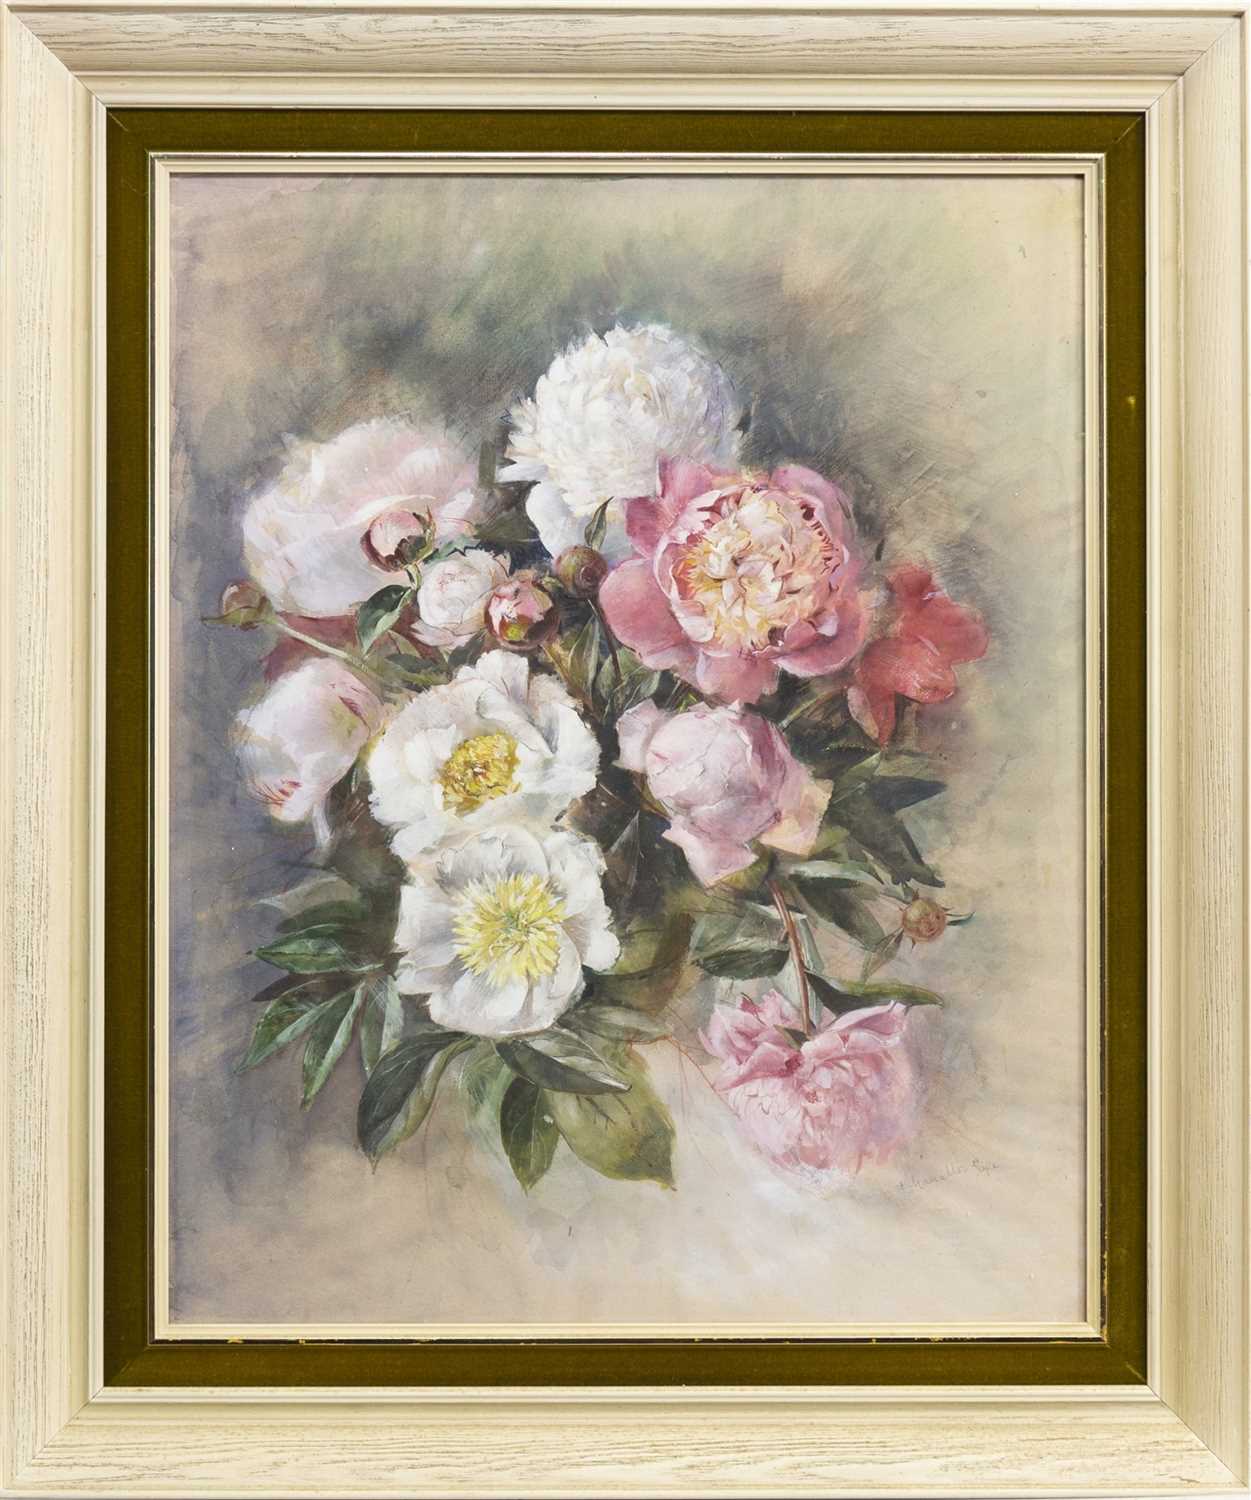 Lot 612 - PINK AND WHITE FLOWERS, A MIXED MEDIA BY HILDA CHANCELLOR POPE